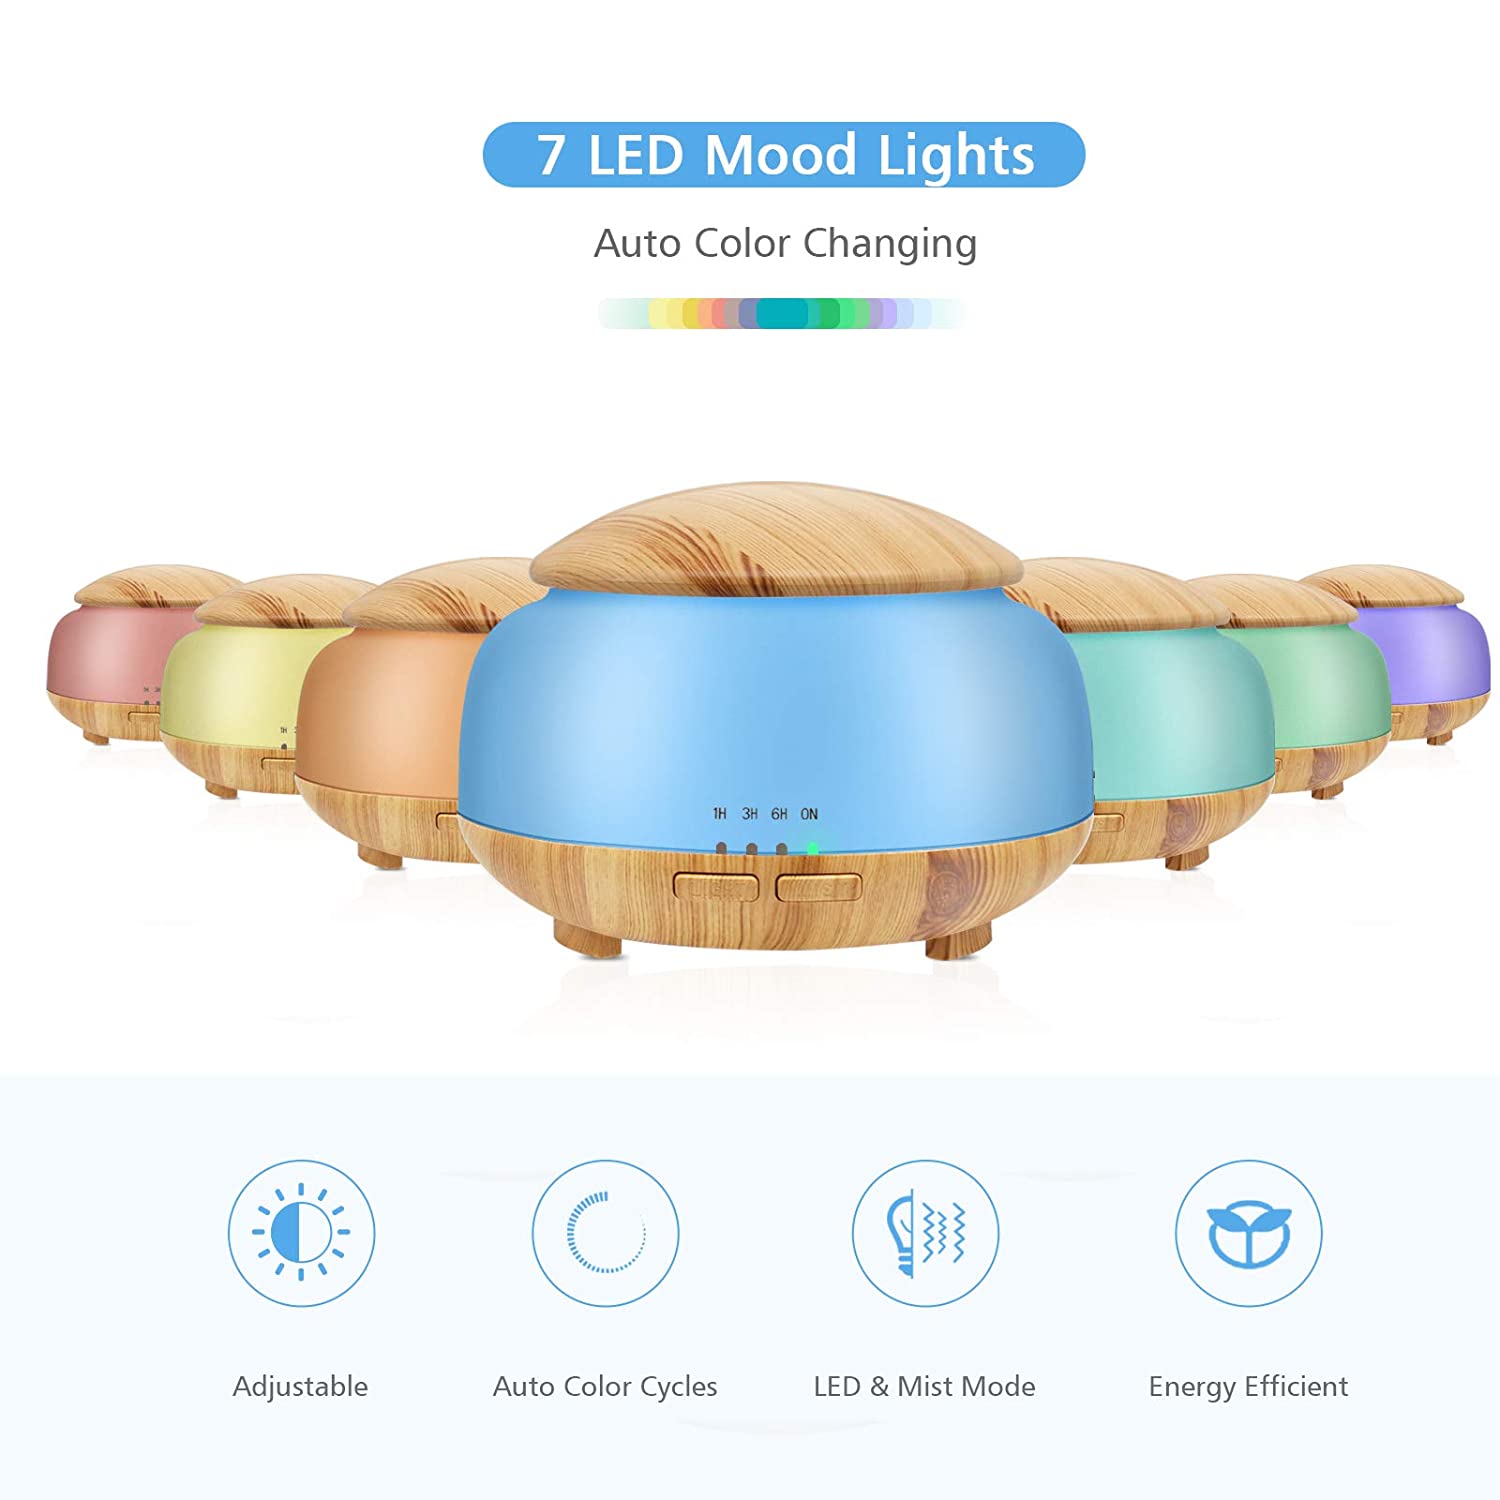 Vasysvi Essential Oil Diffuser Humidifiers,Aromatherapy Diffuser, Ceramic  Wood Grain Diffusers for Oils,7-Color Night Light Aroma Home,Office and